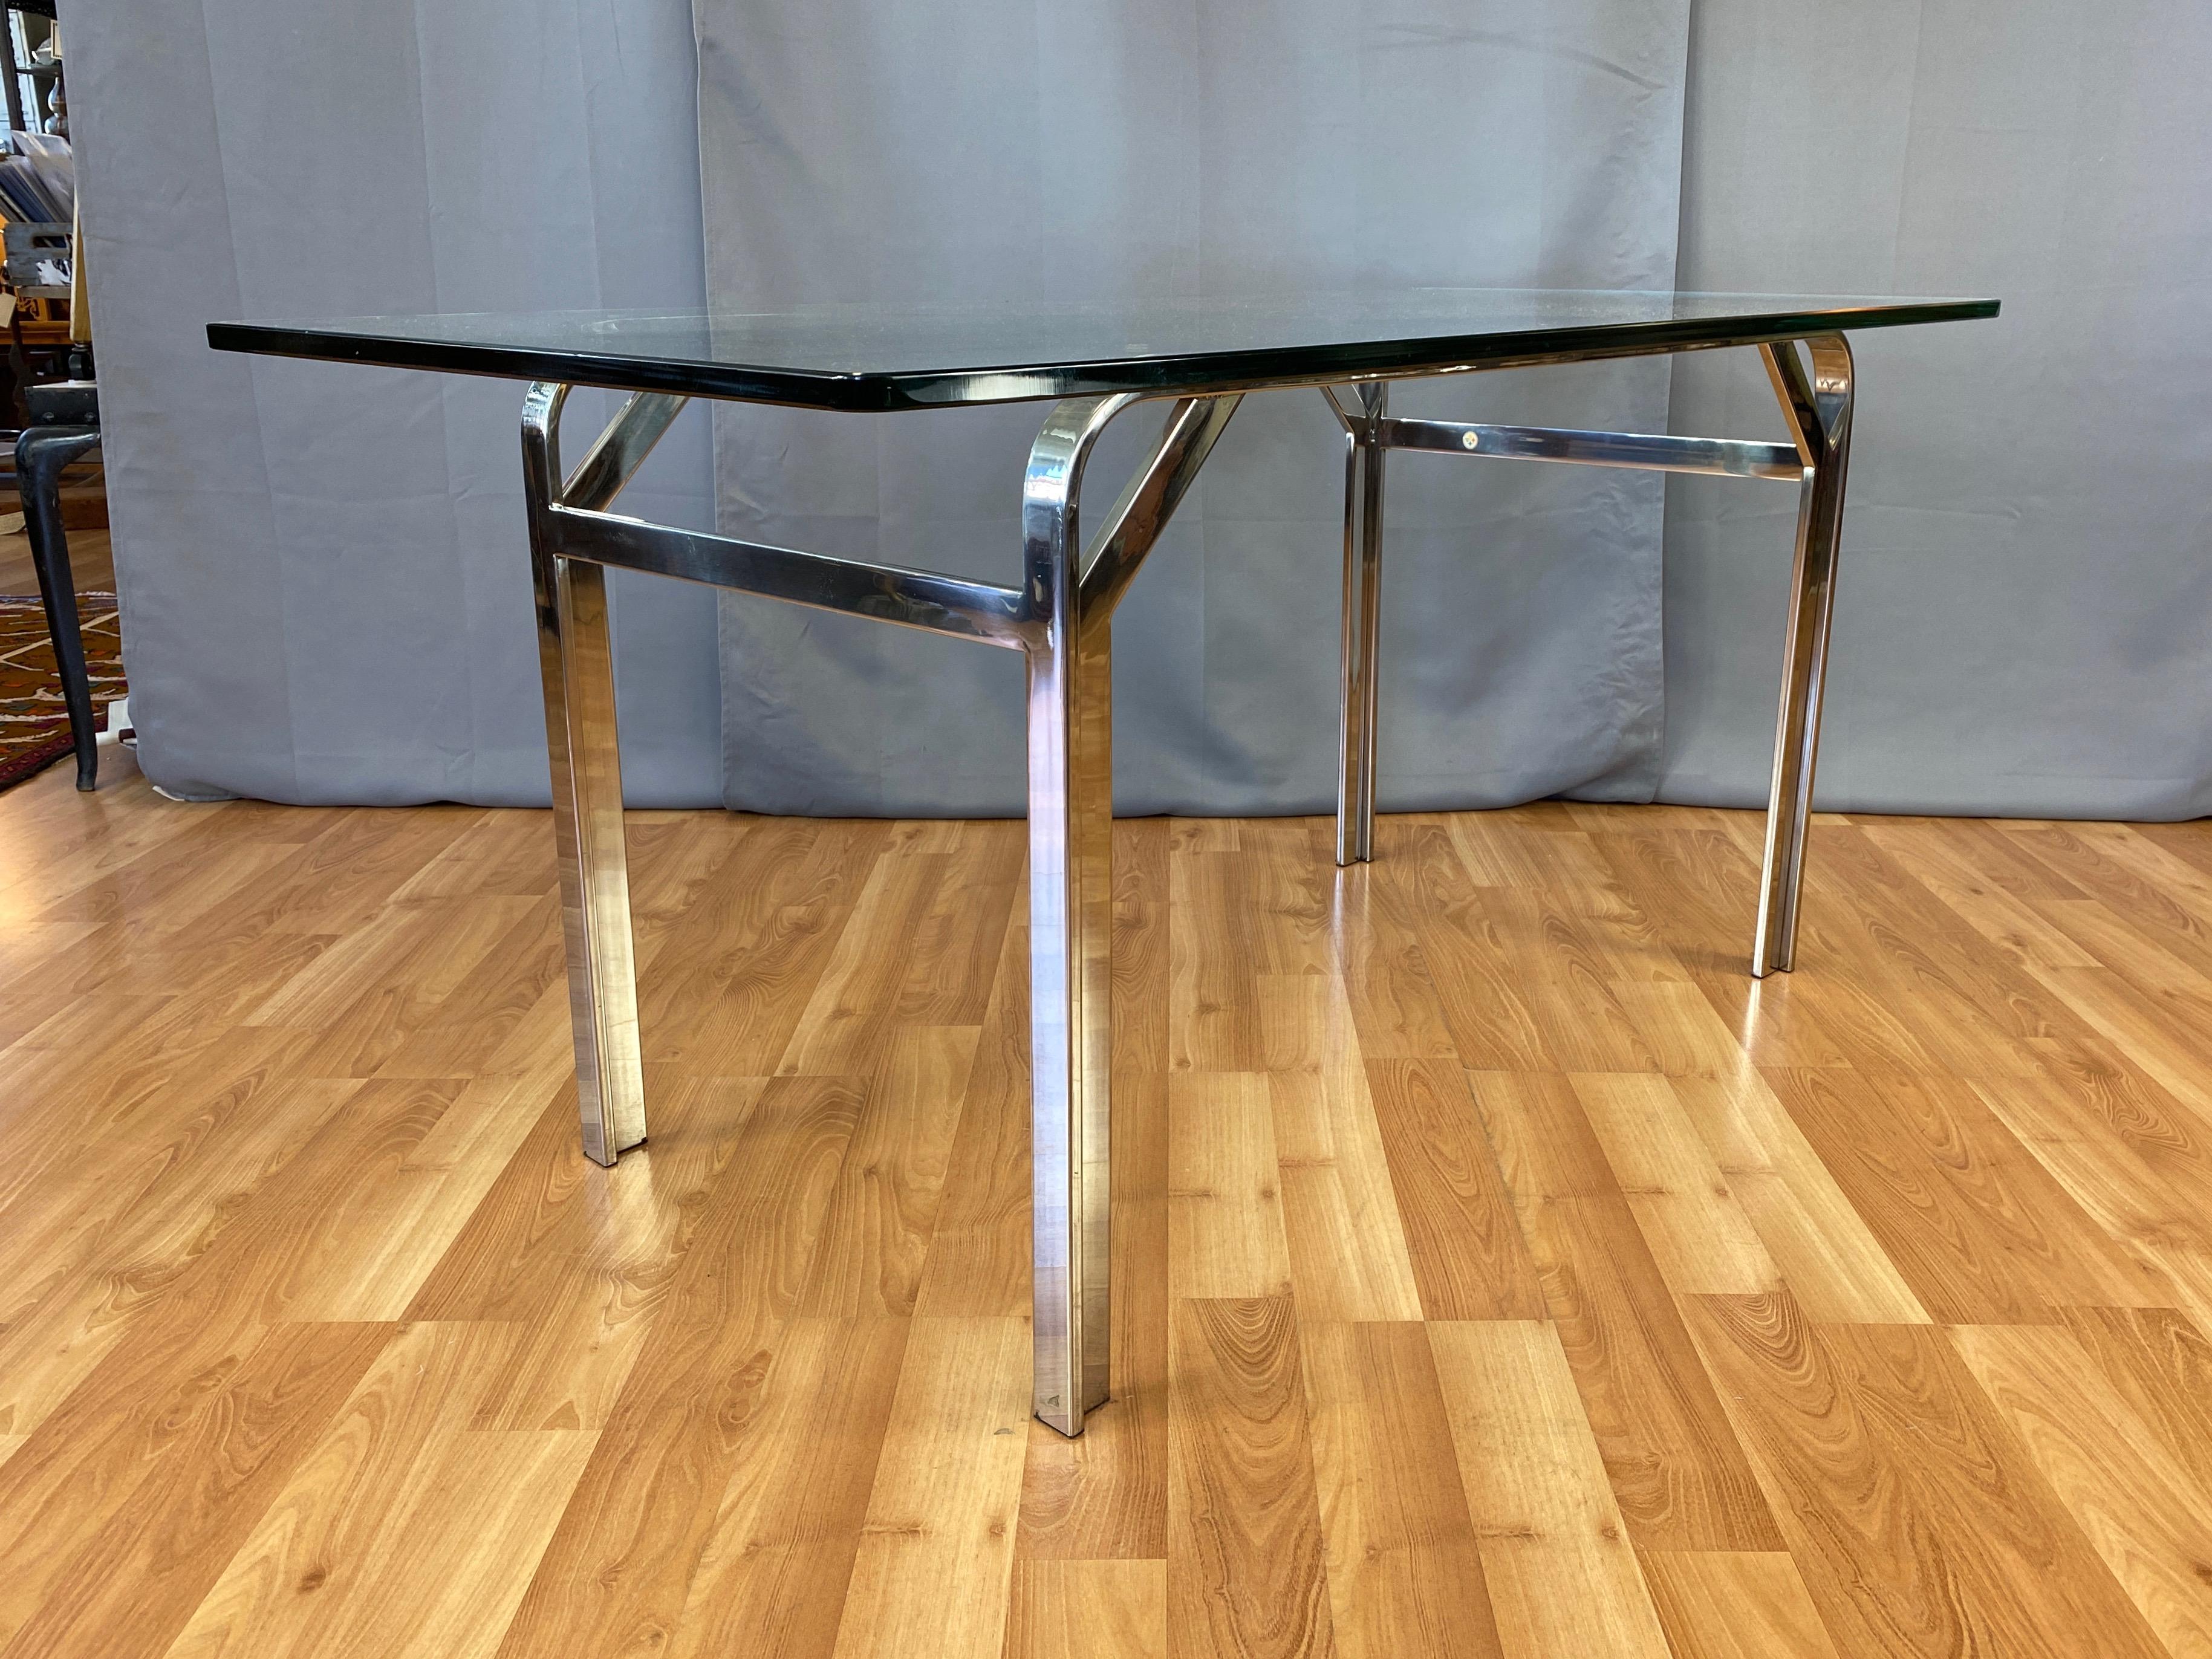 Steelcase Polished Nickel-Plated Steel Desk or Table with Glass Top, 1970s 6